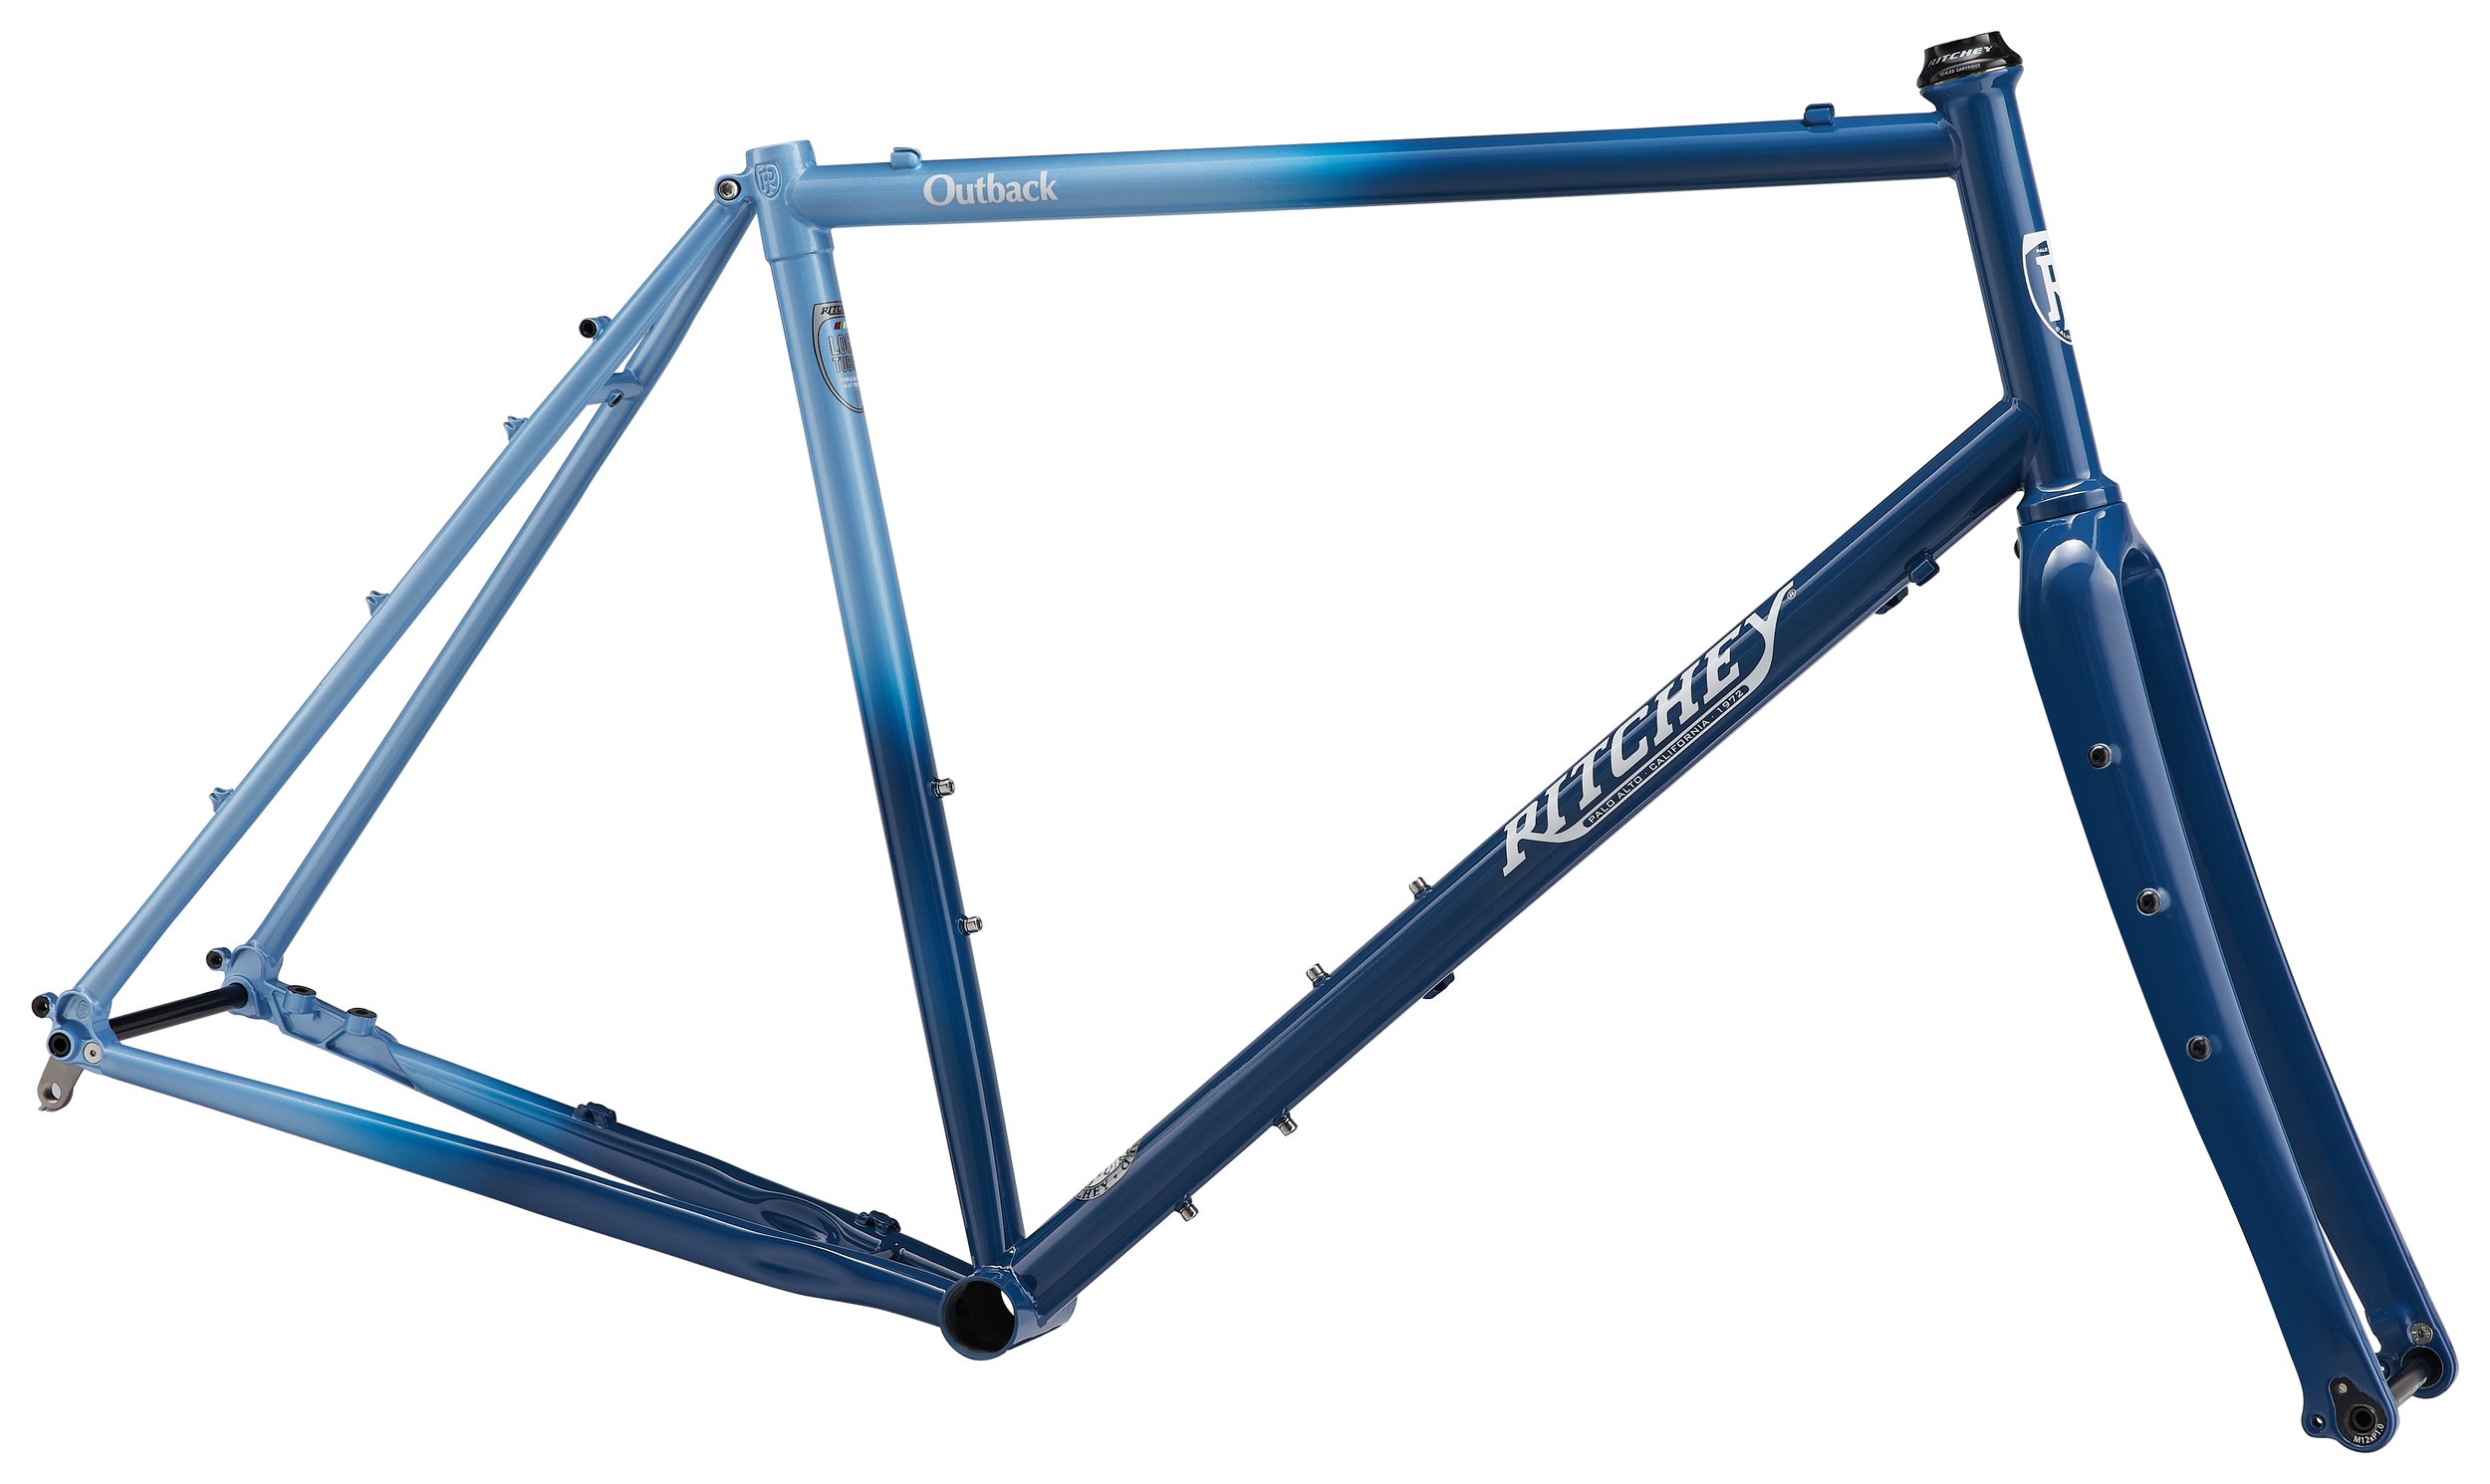 frame-outback-50th-anniversary-blue-fade-side.jpg